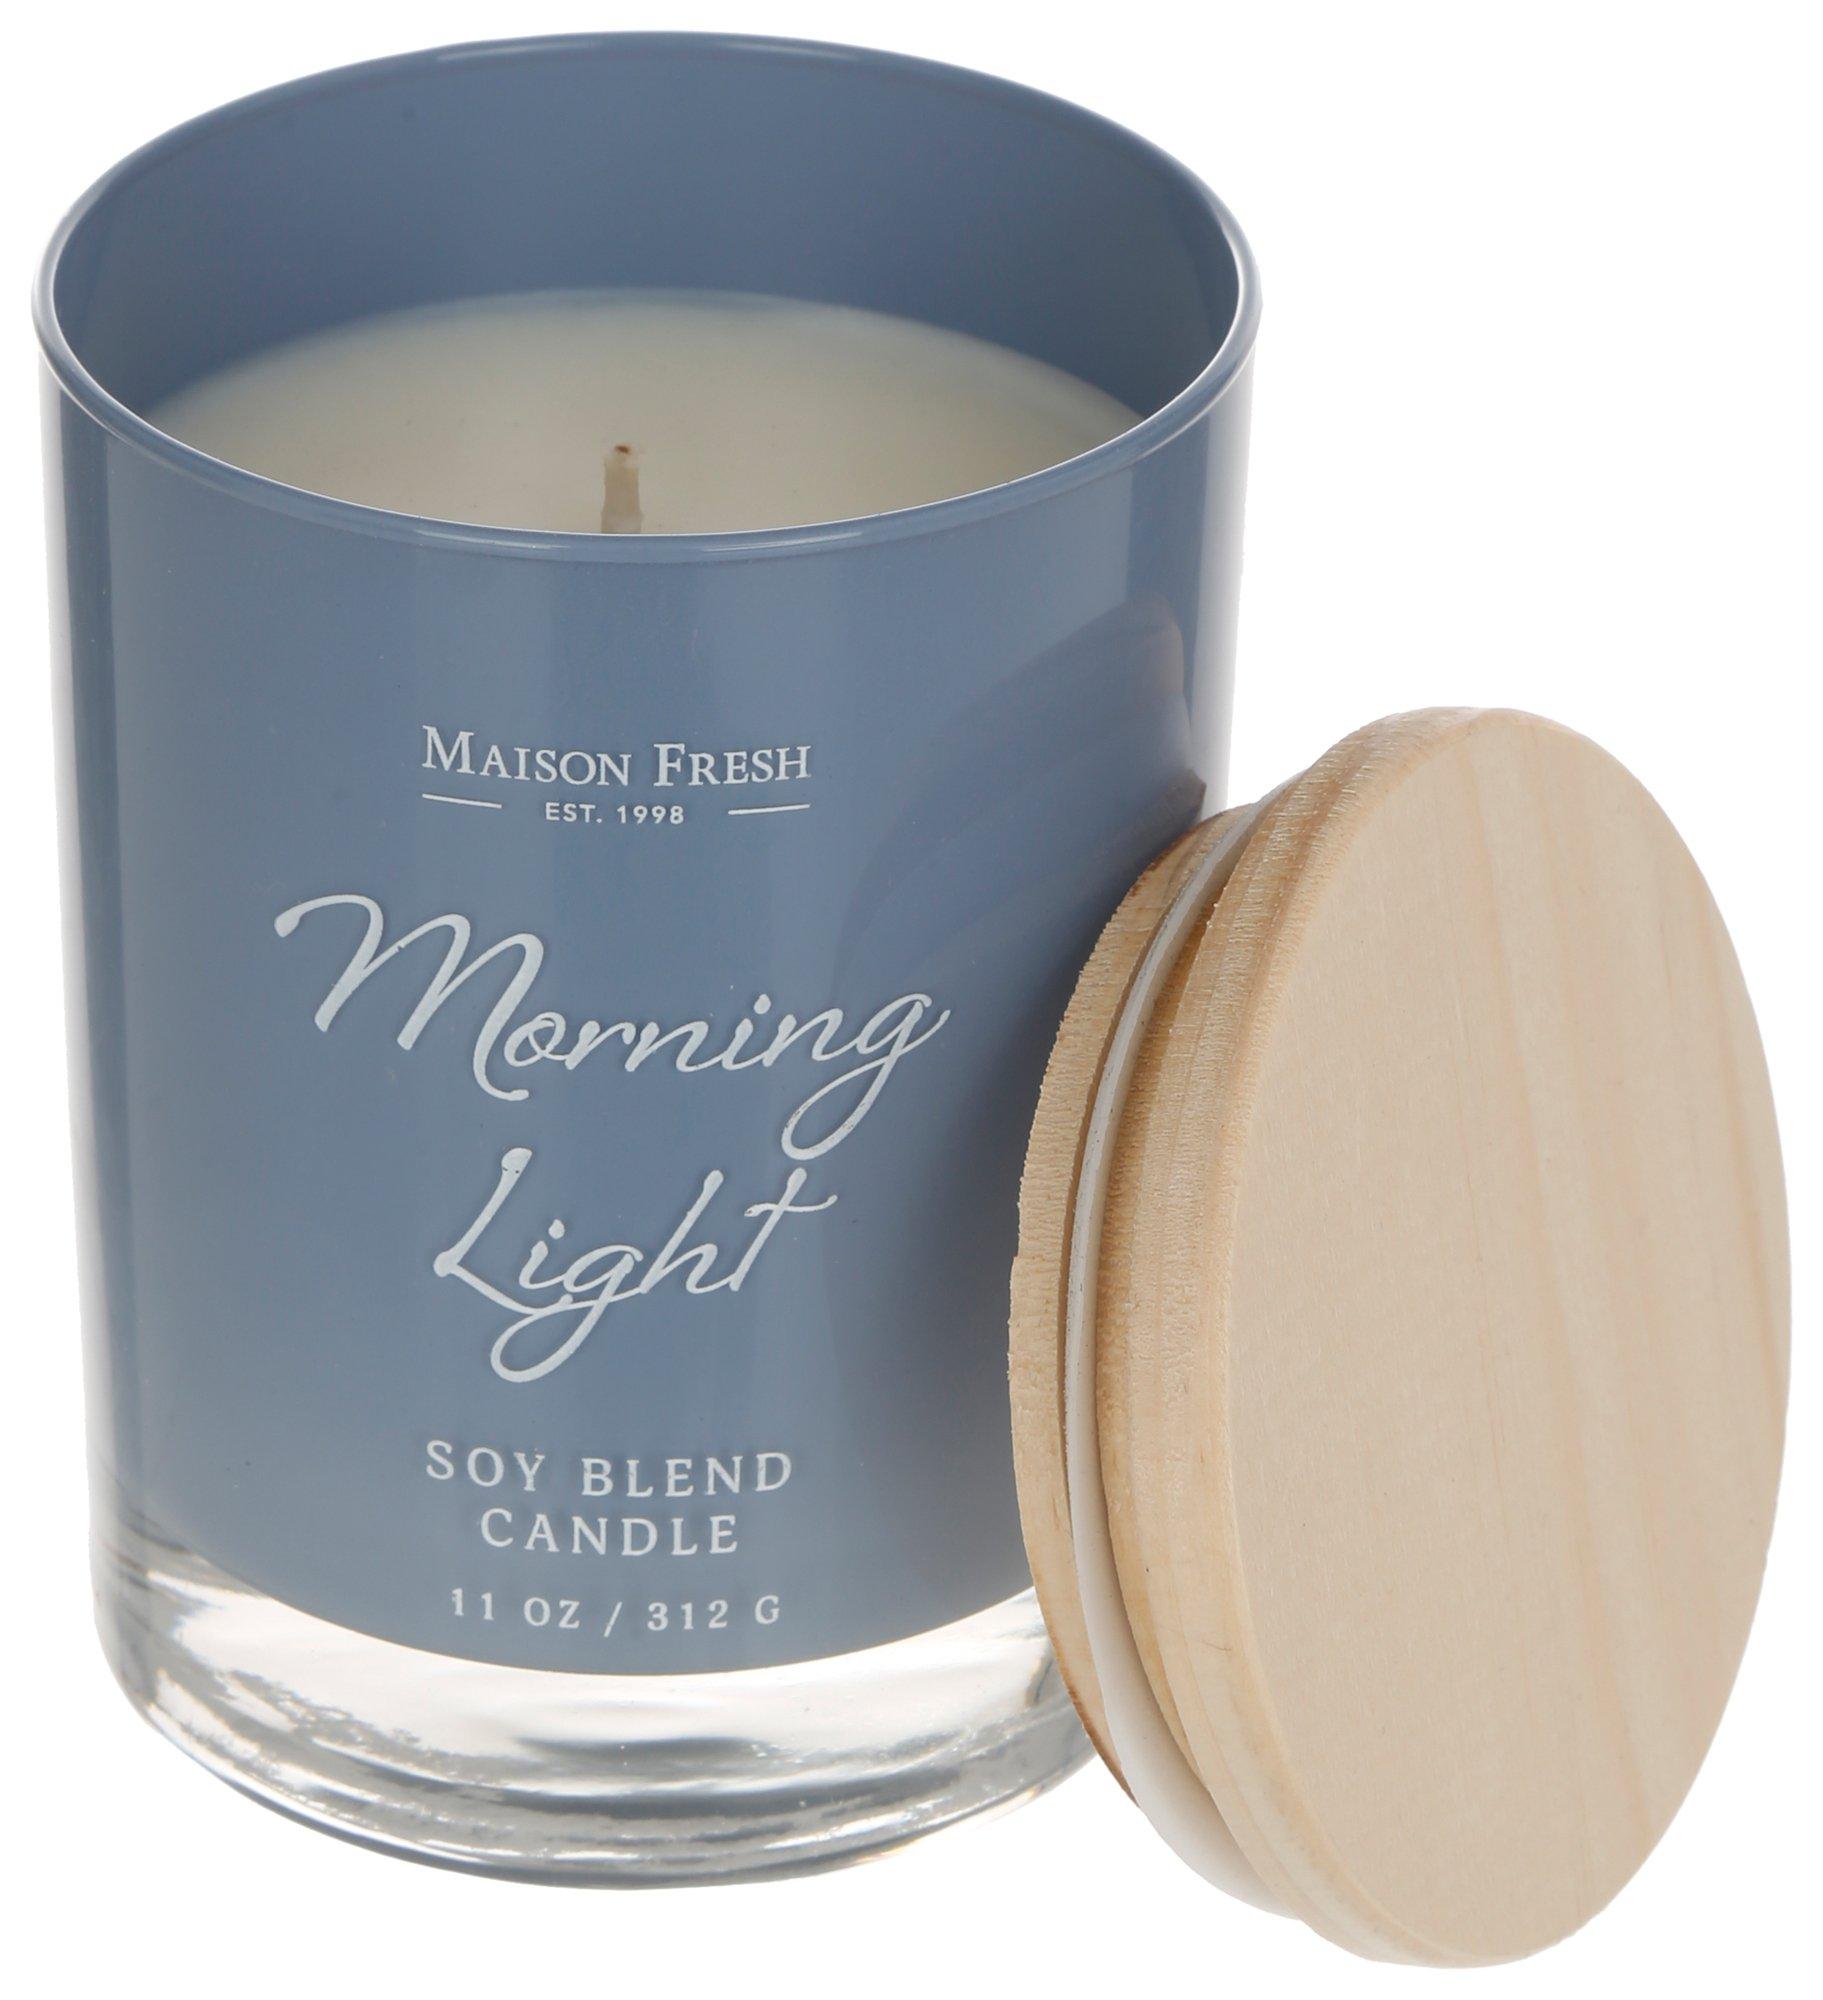 11 oz Morning Light Scented Candle